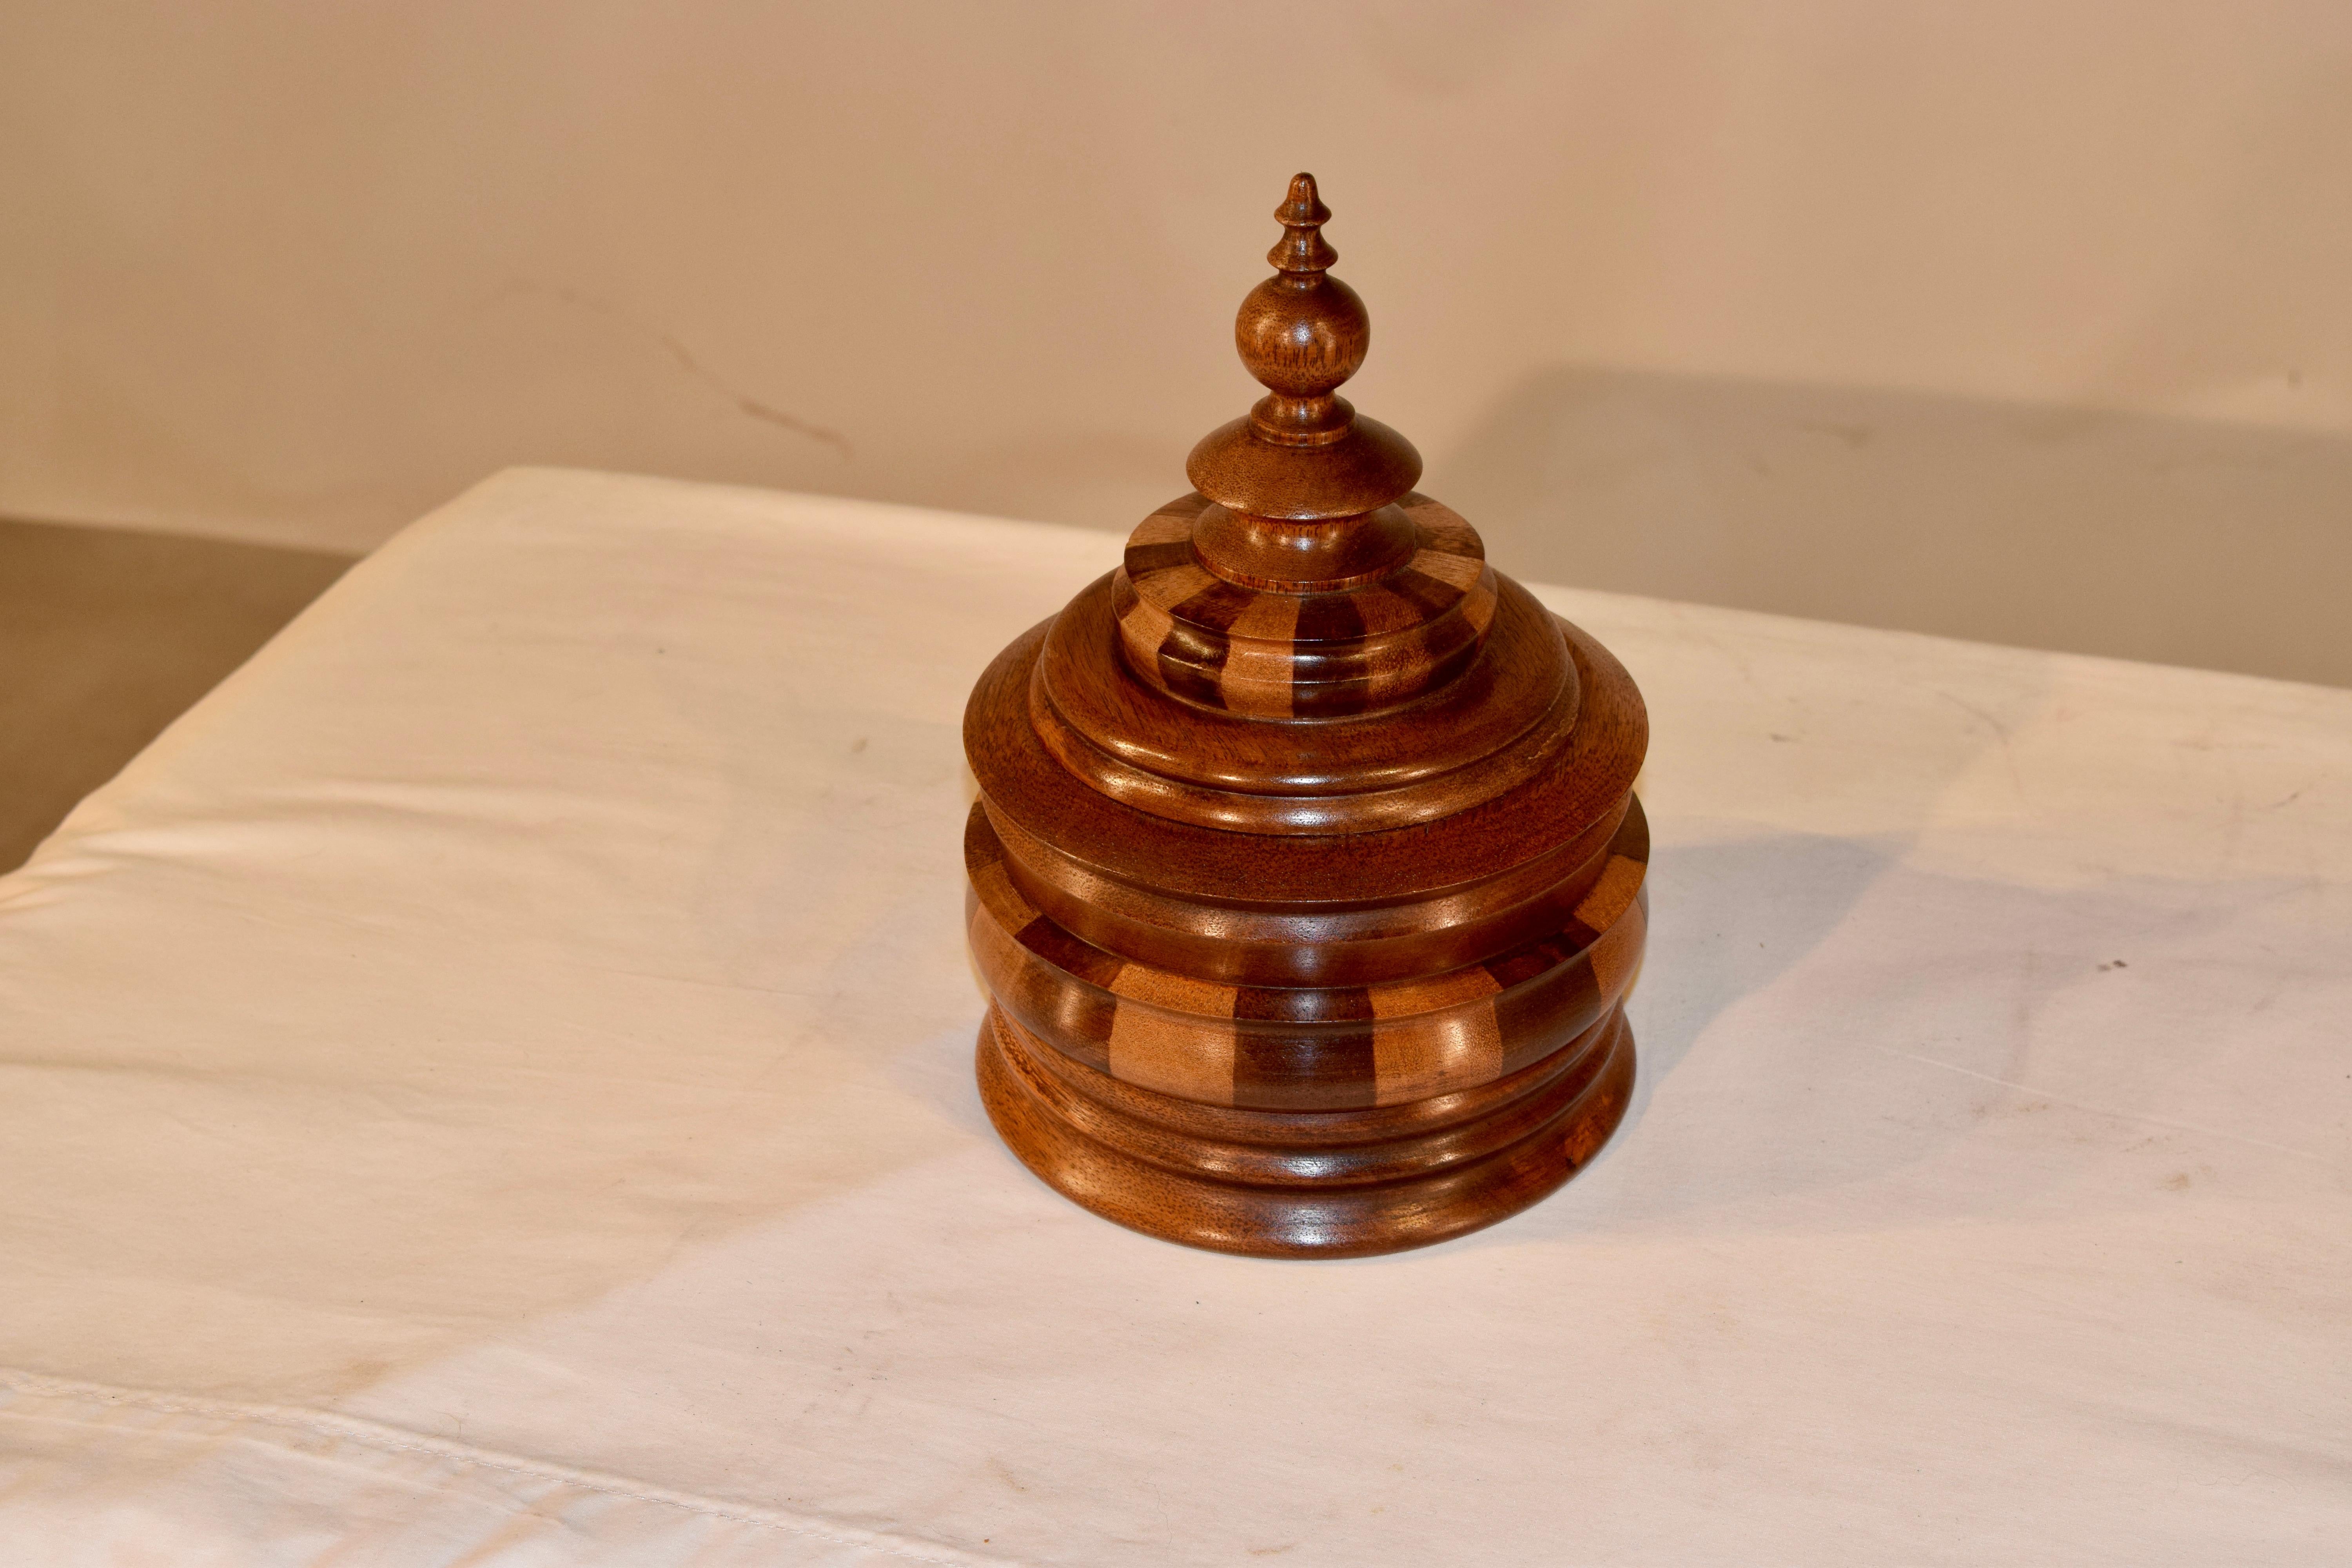 C. 1900 very large oak and fruitwood turned jar with a tall hand turned finial atop a hand turned and striped detailed lid over a hand turned base, which also has striped and turned wood detailing. Lovely shape and size.